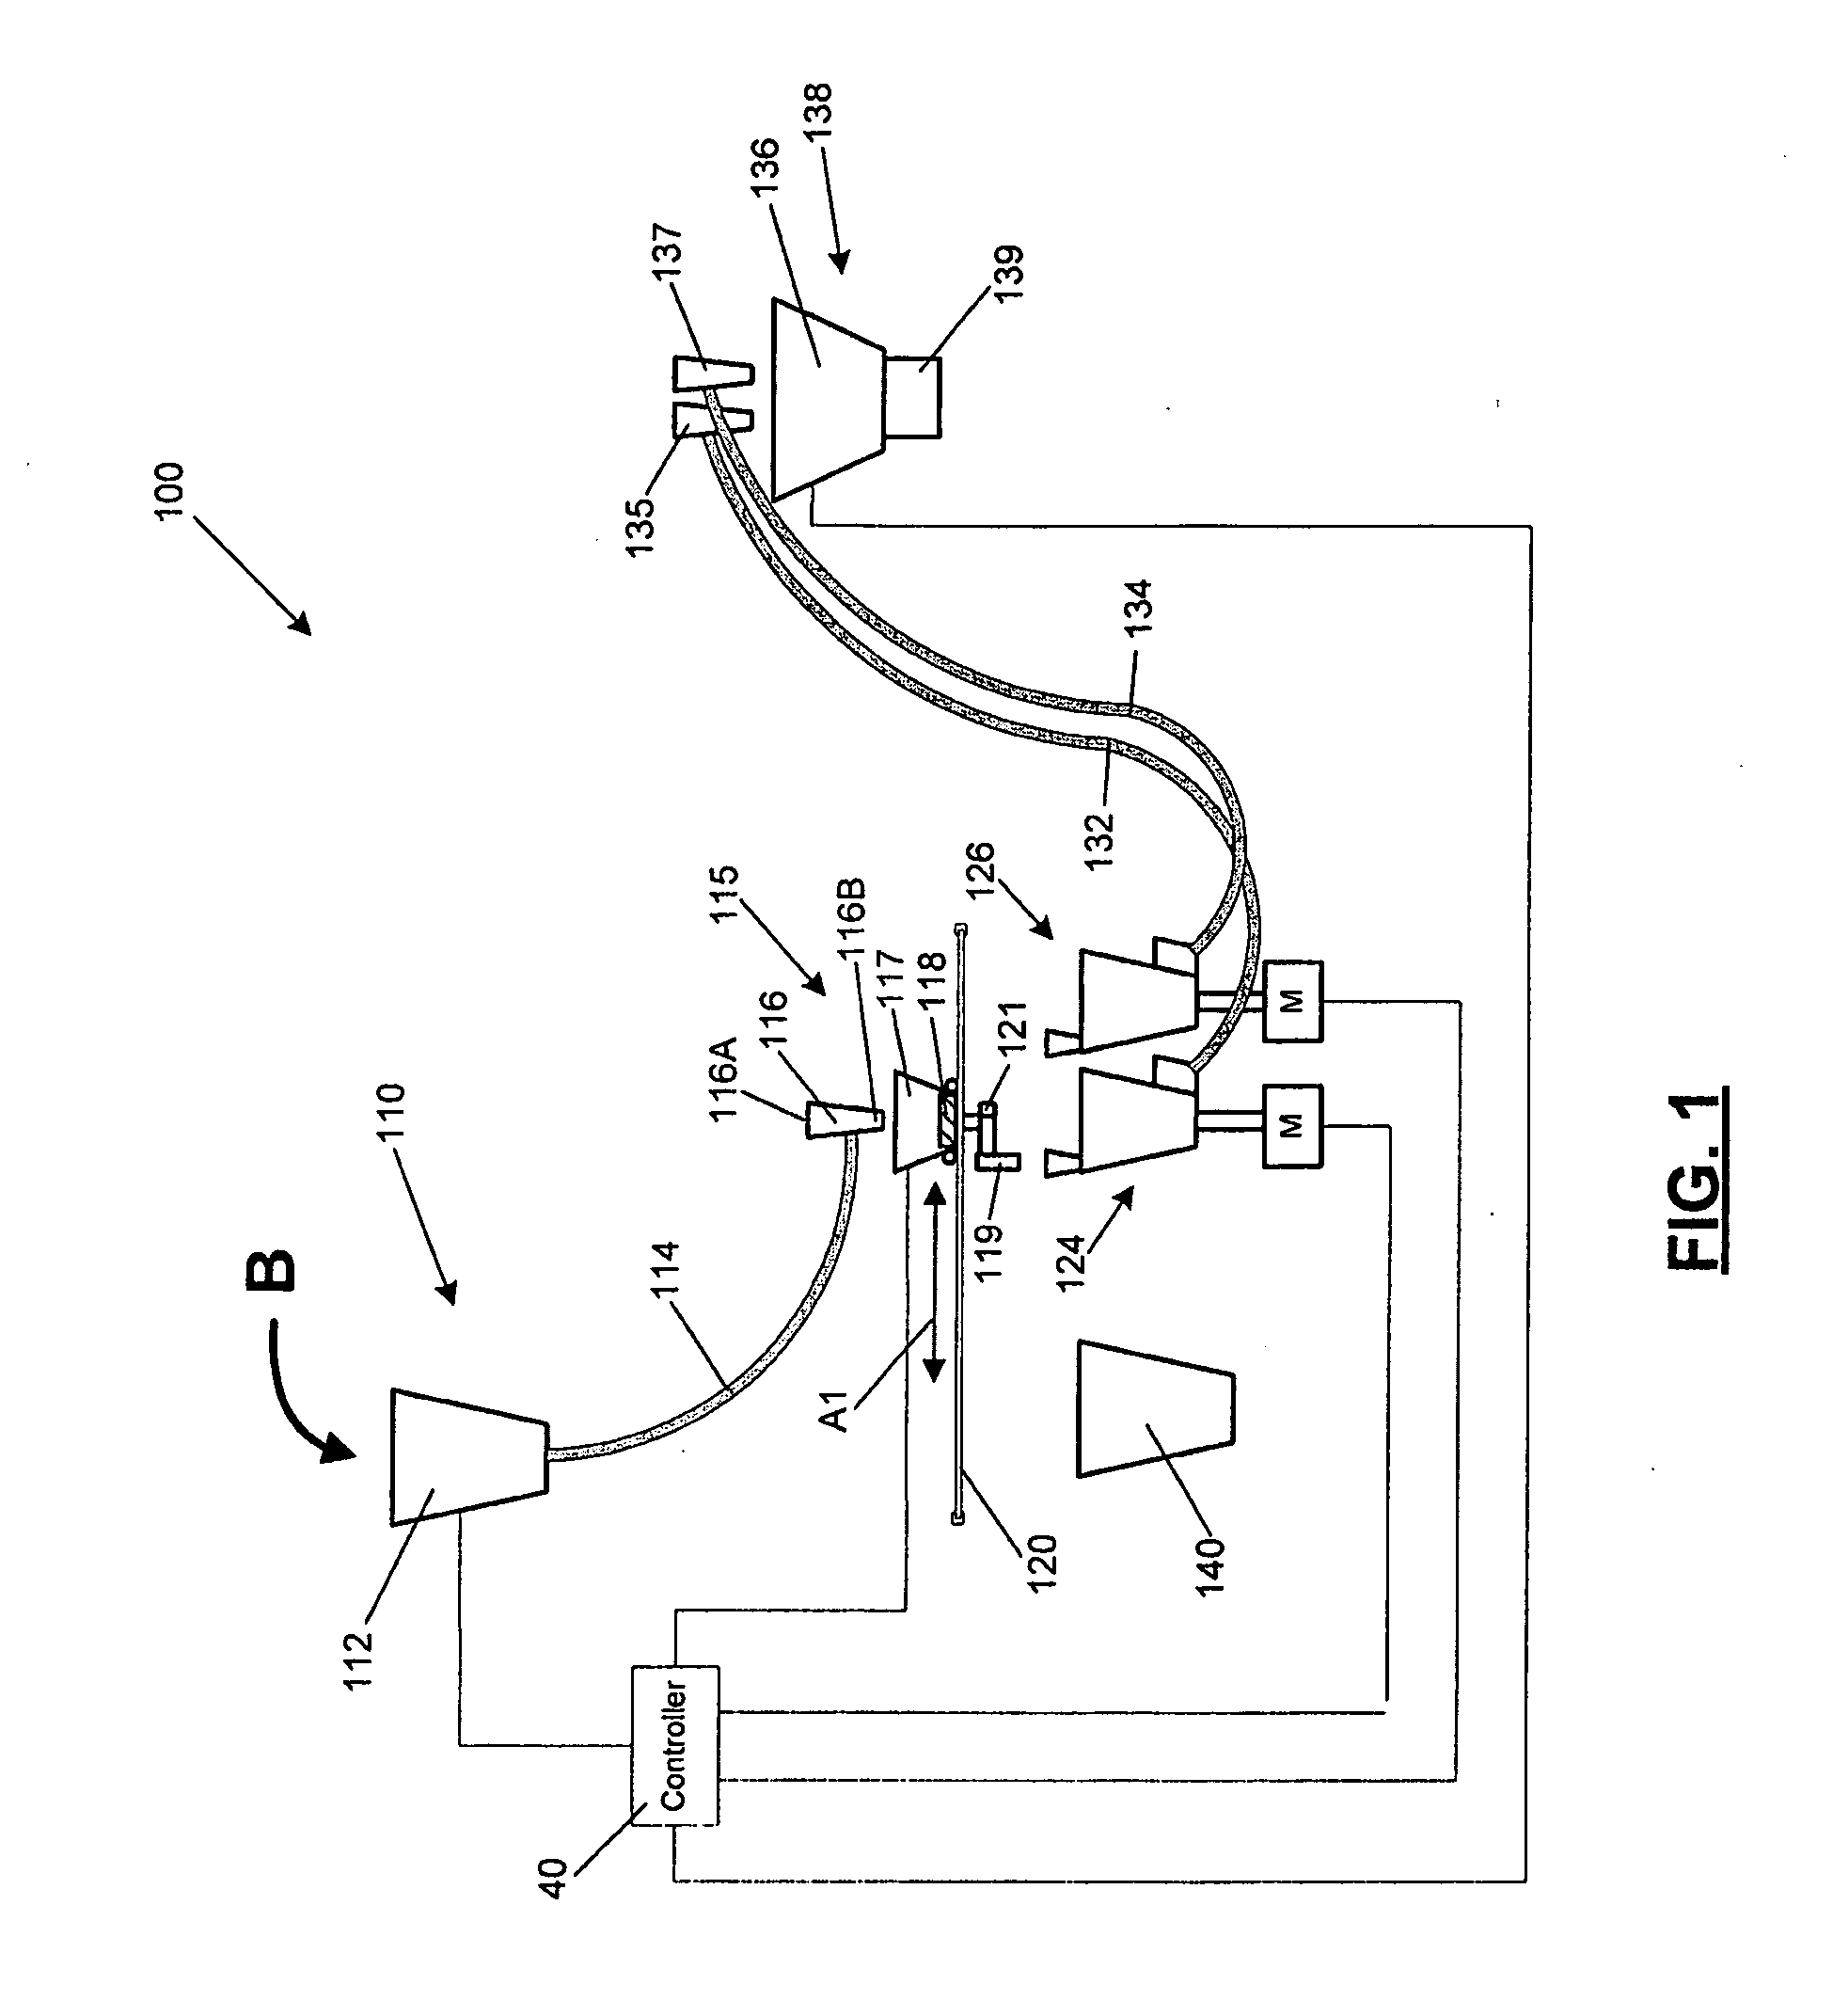 High speed seed treatment apparatus